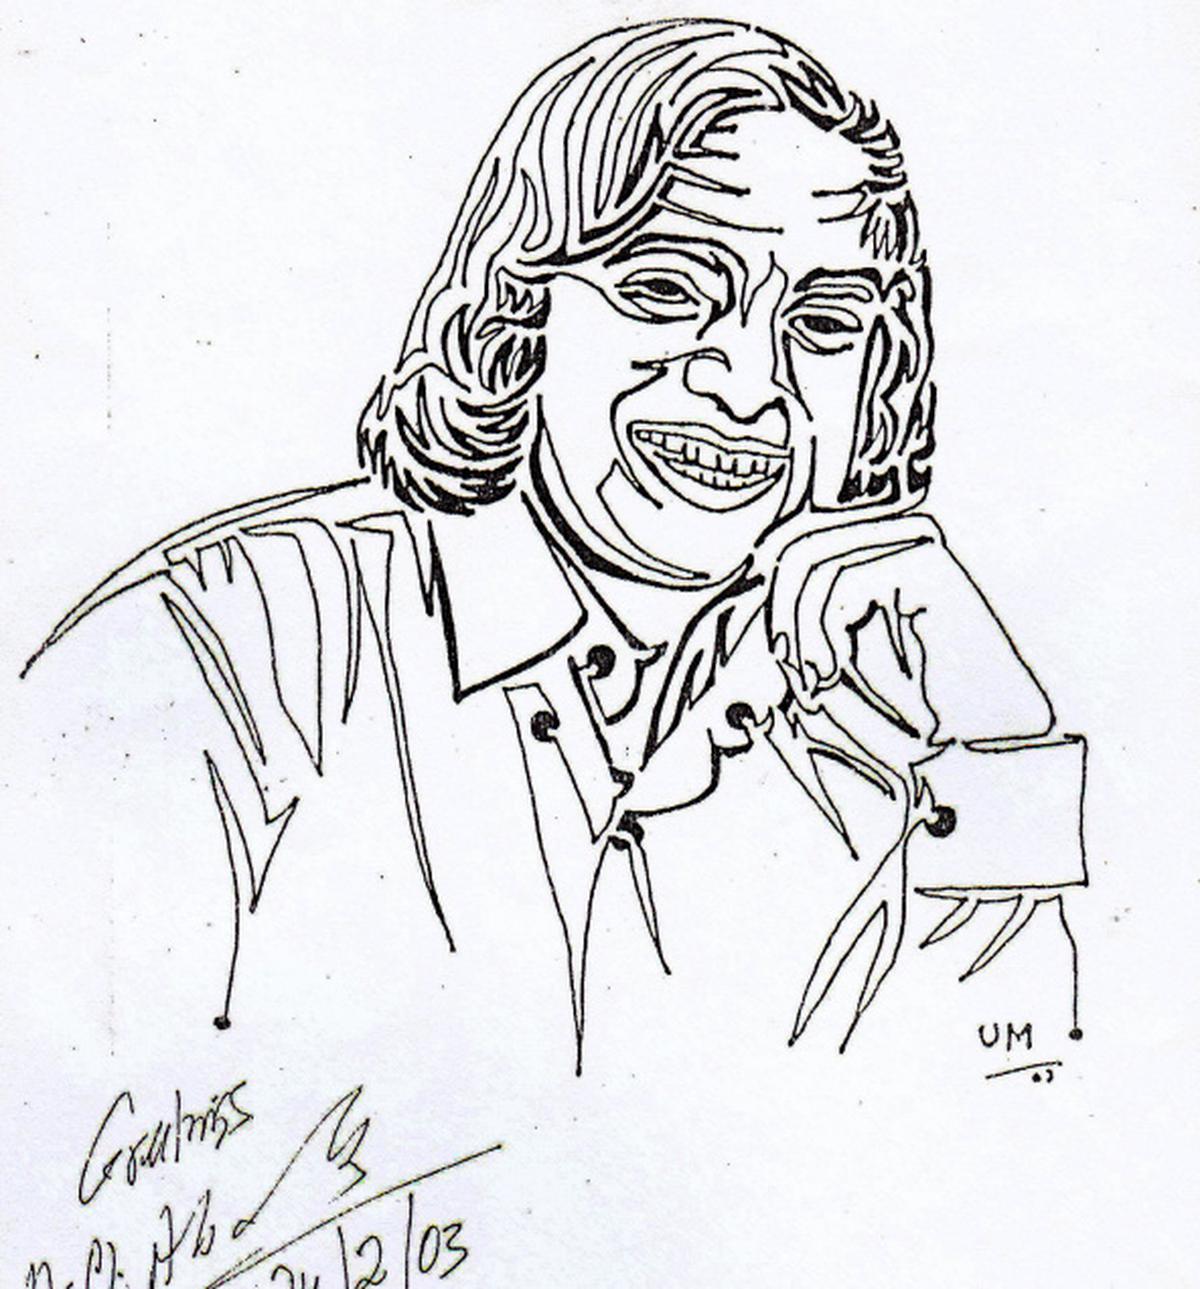 Awesome Drawing on X Great Minds not bornThey Grown Click below for  the drawing cum Words of a Great Mind httpstcoxDEPUaqIXV DrApj  Abdul Kalam drawing drawings PeriyarStatue InvestForProgress kalam  httpstcohyKNIhi82m  X